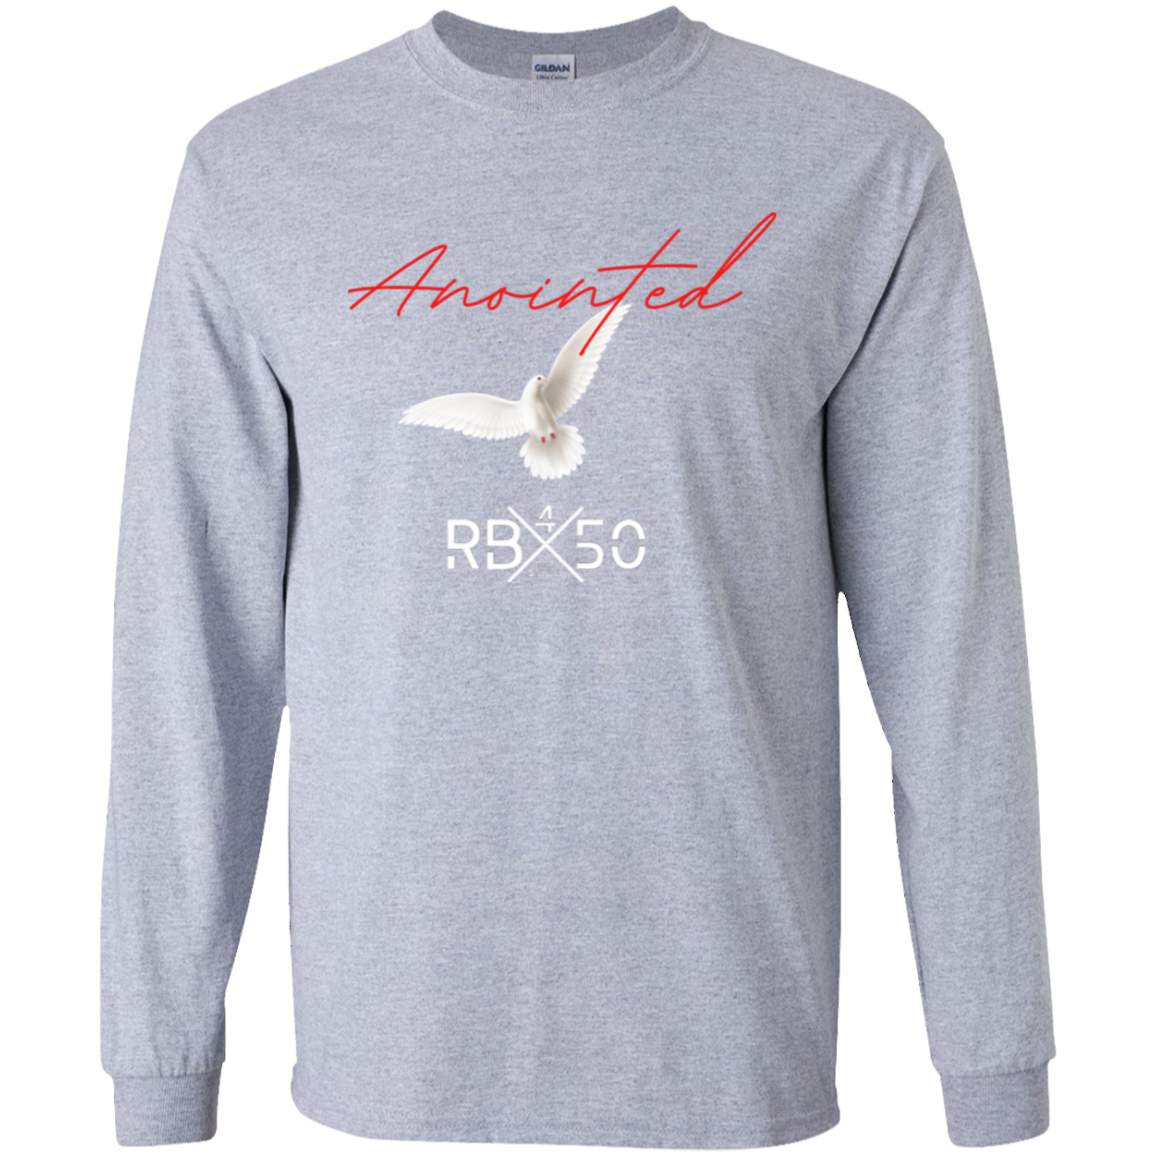 RB450 ANTD Youth LS T-Shirt